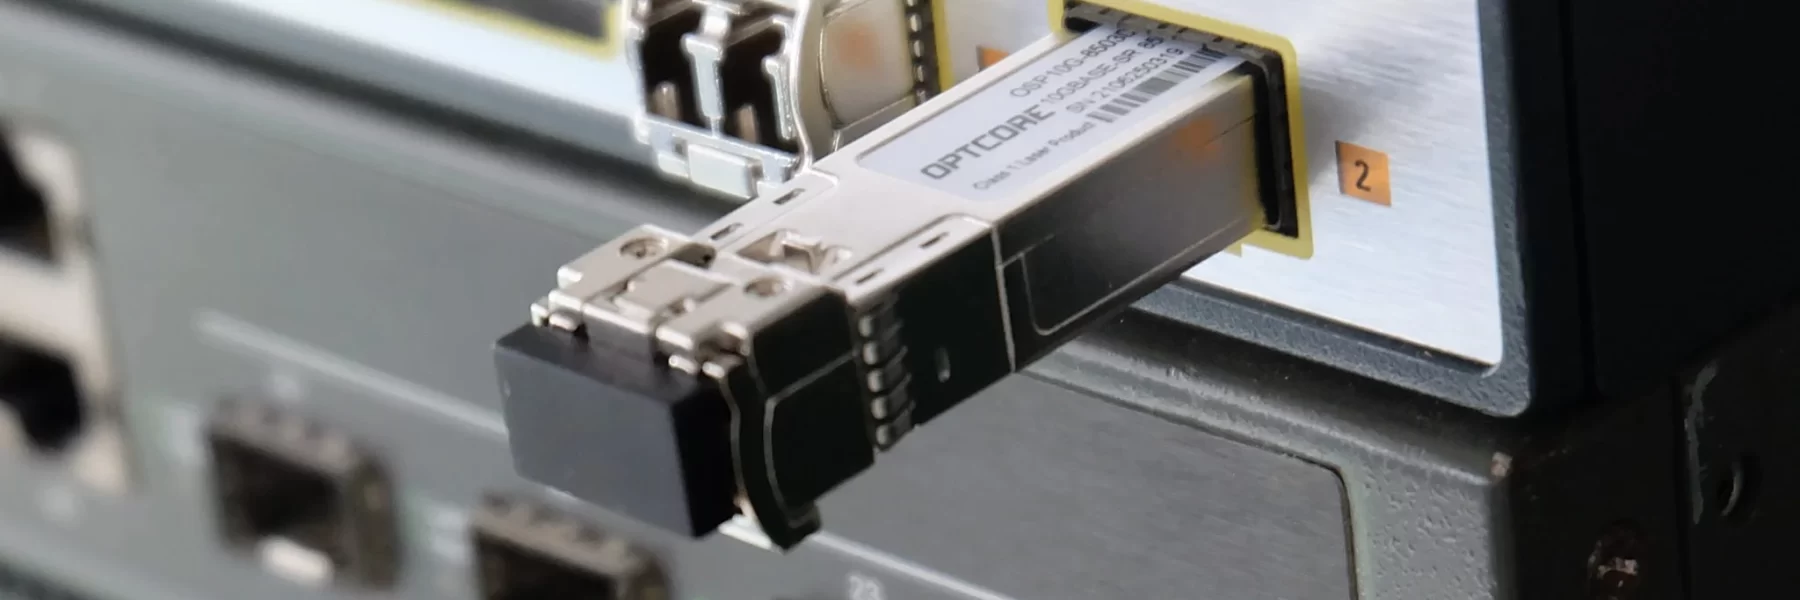 Demystifying Network Infrastructure: Understanding Transceivers, SFP, SFP+, QSFP28, and Network Switches